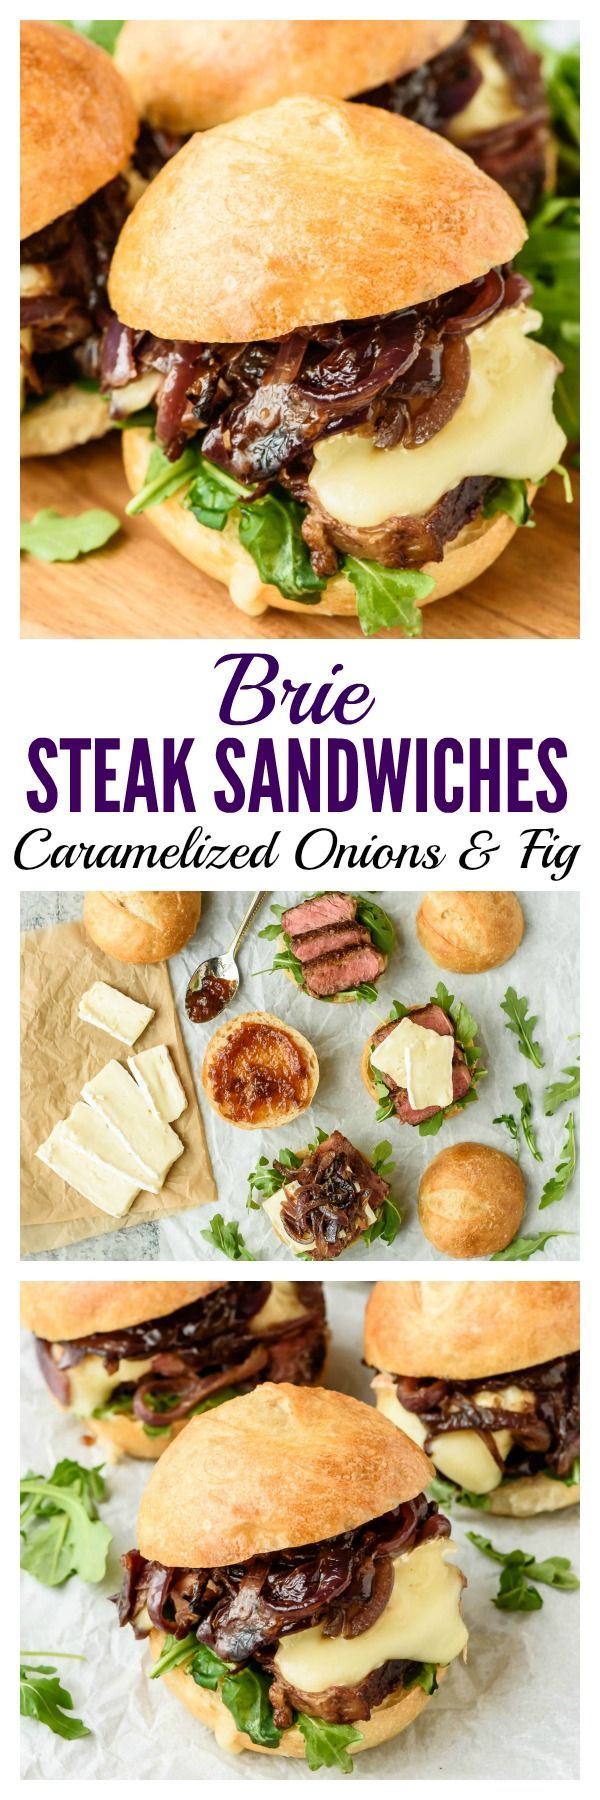 Mini Steak Sandwich with Brie, Caramelized Onions, and Fig Jam